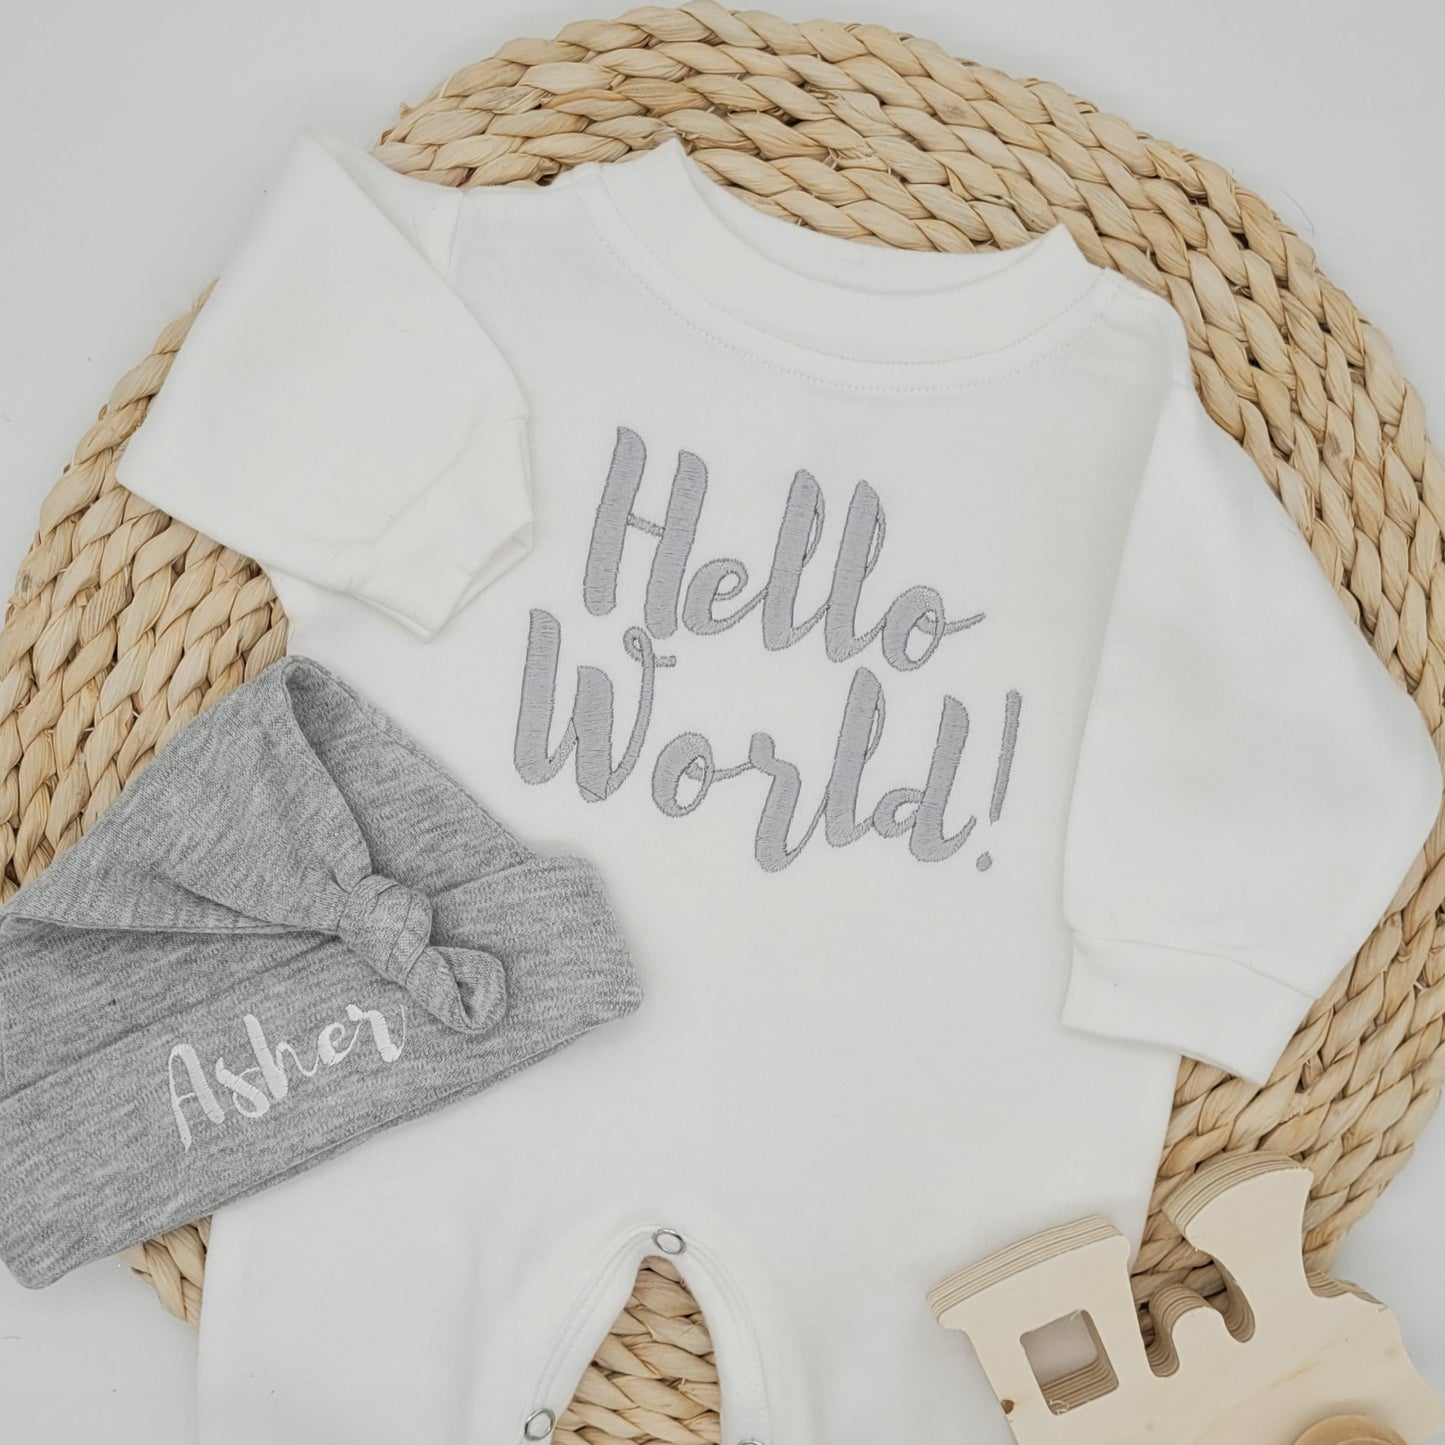 Newborn Boy Hello World Outfit with Knotted Hat